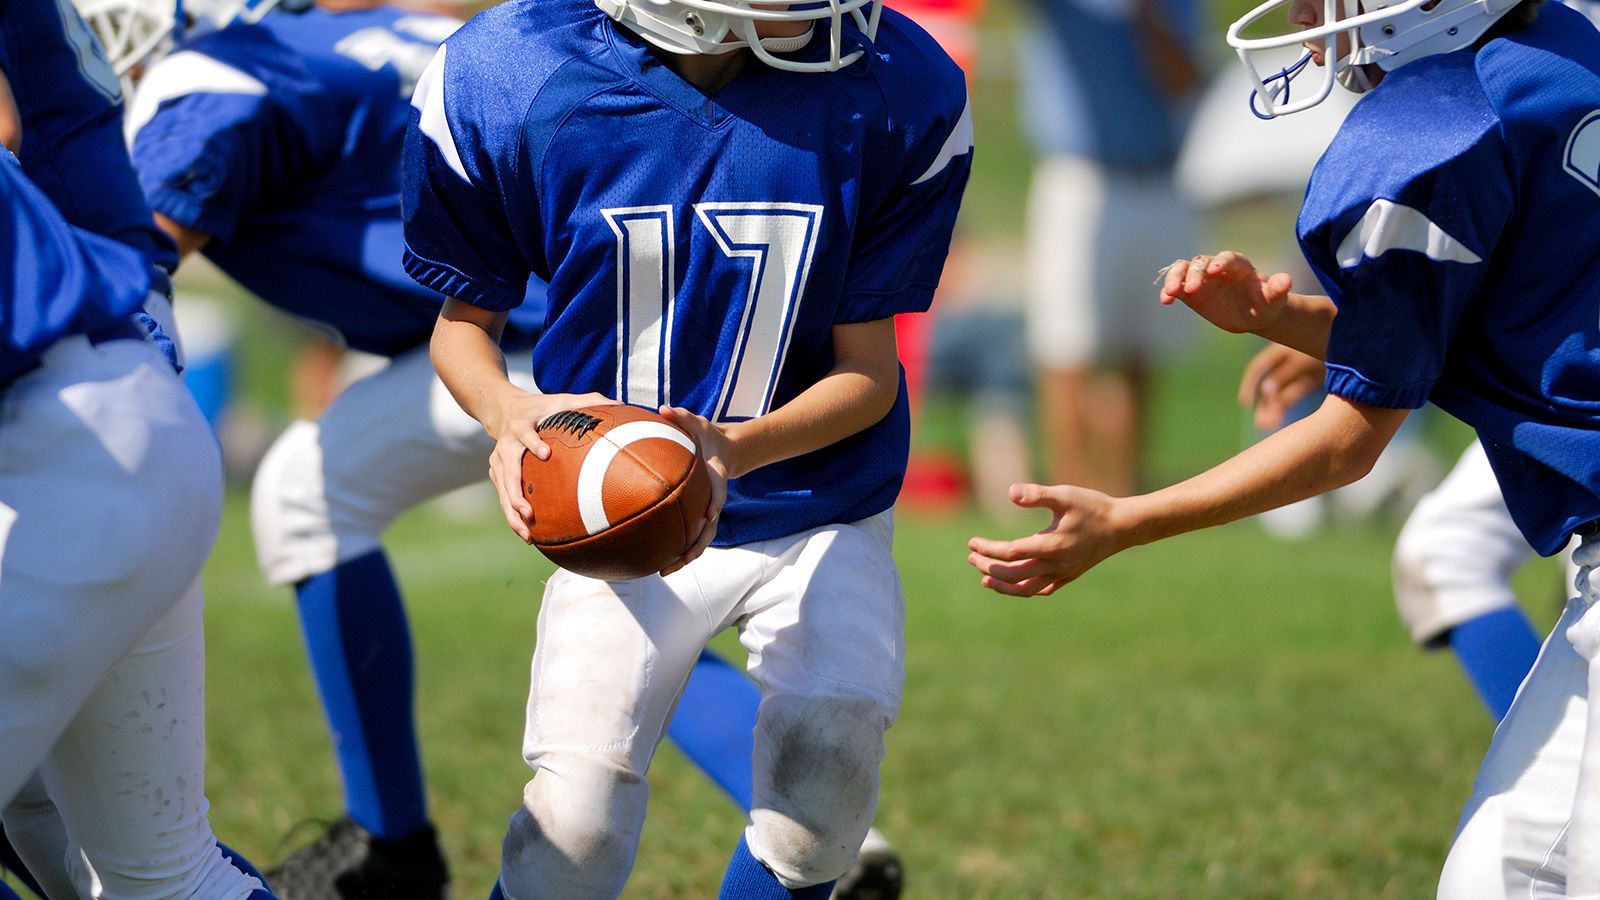 Restrictions for Children Who Play Sports